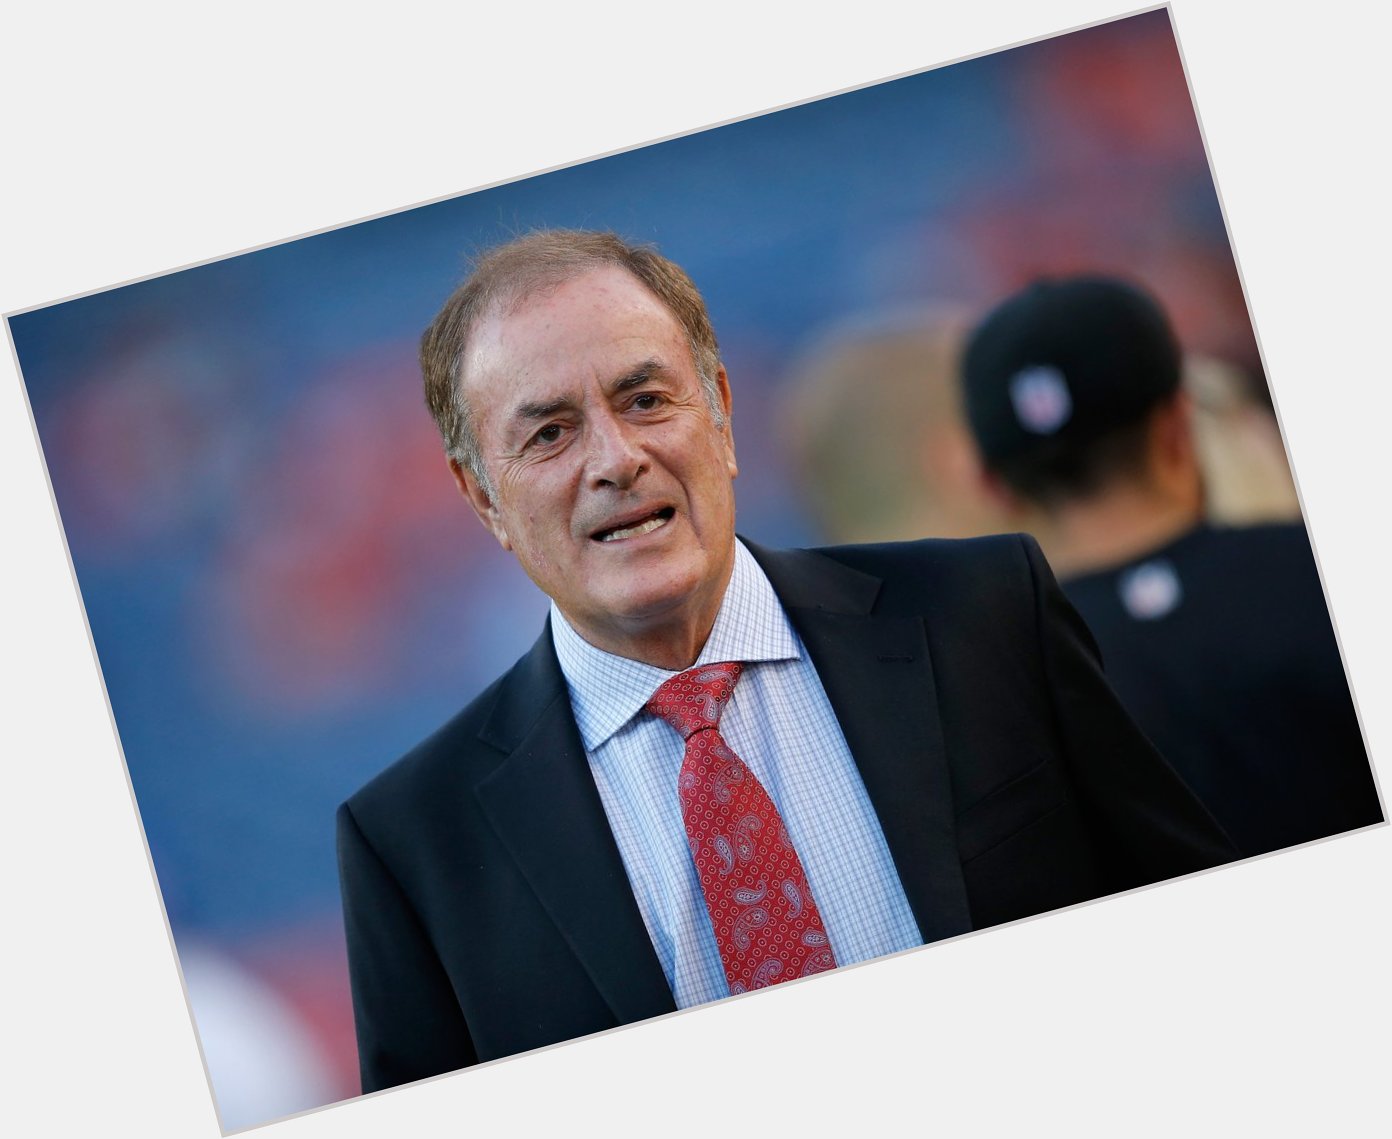 Happy Birthday to Al Michaels! He used to call games on TV but I kind of lost track of him after that. 